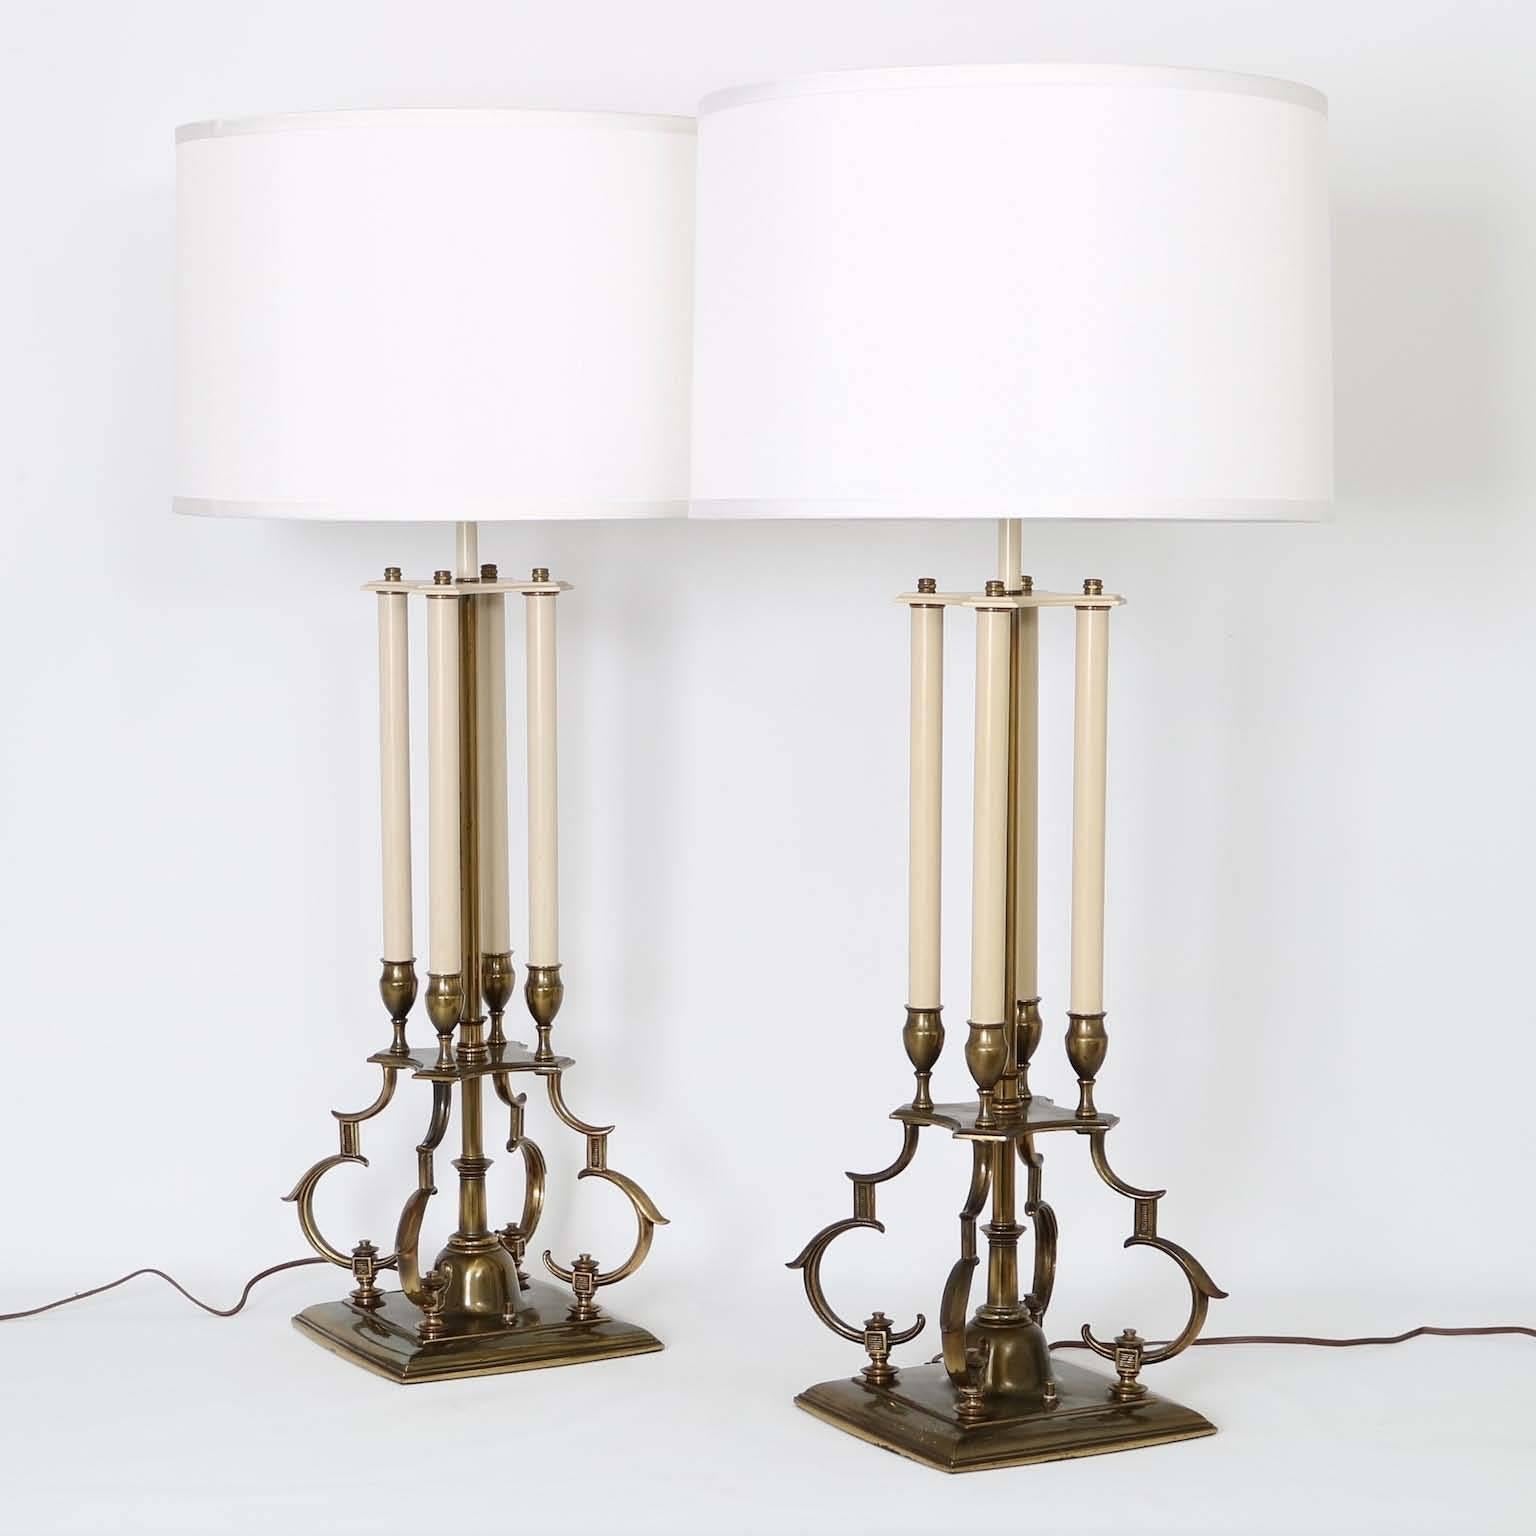 Mid-Century Modern pair of lamps in brass by designer Tommi Parzinger for Stiffel, bases influenced by Gothic styles. Very good vintage condition, wear is consistent with age and use. The noted height is to the top of the finial. 

Please note